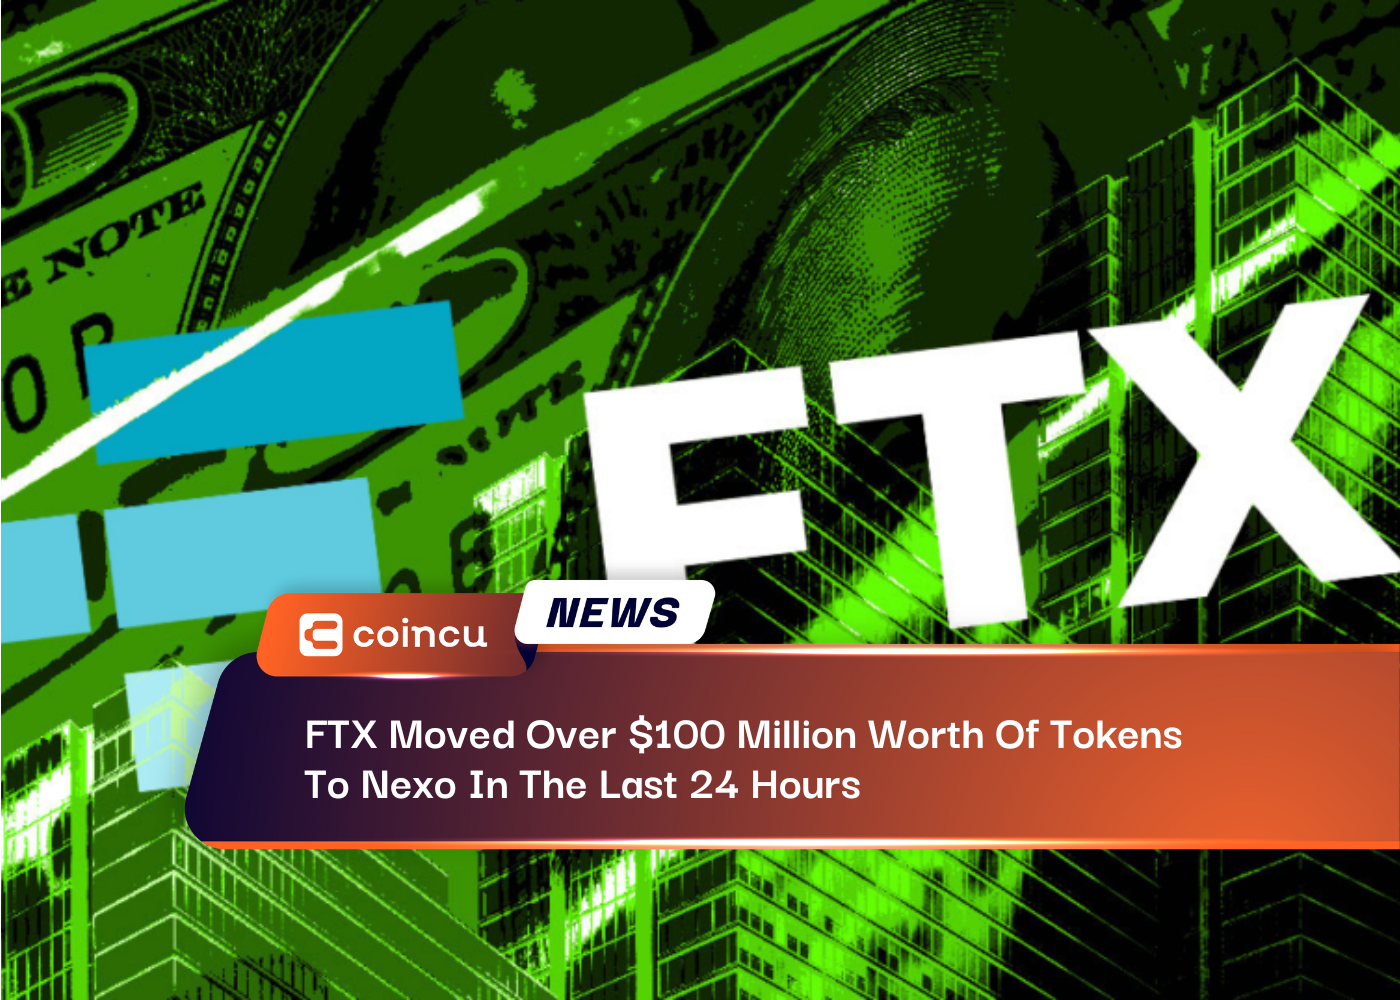 FTX Moved Over $100 Million Worth Of Tokens To Nexo In The Last 24 Hours